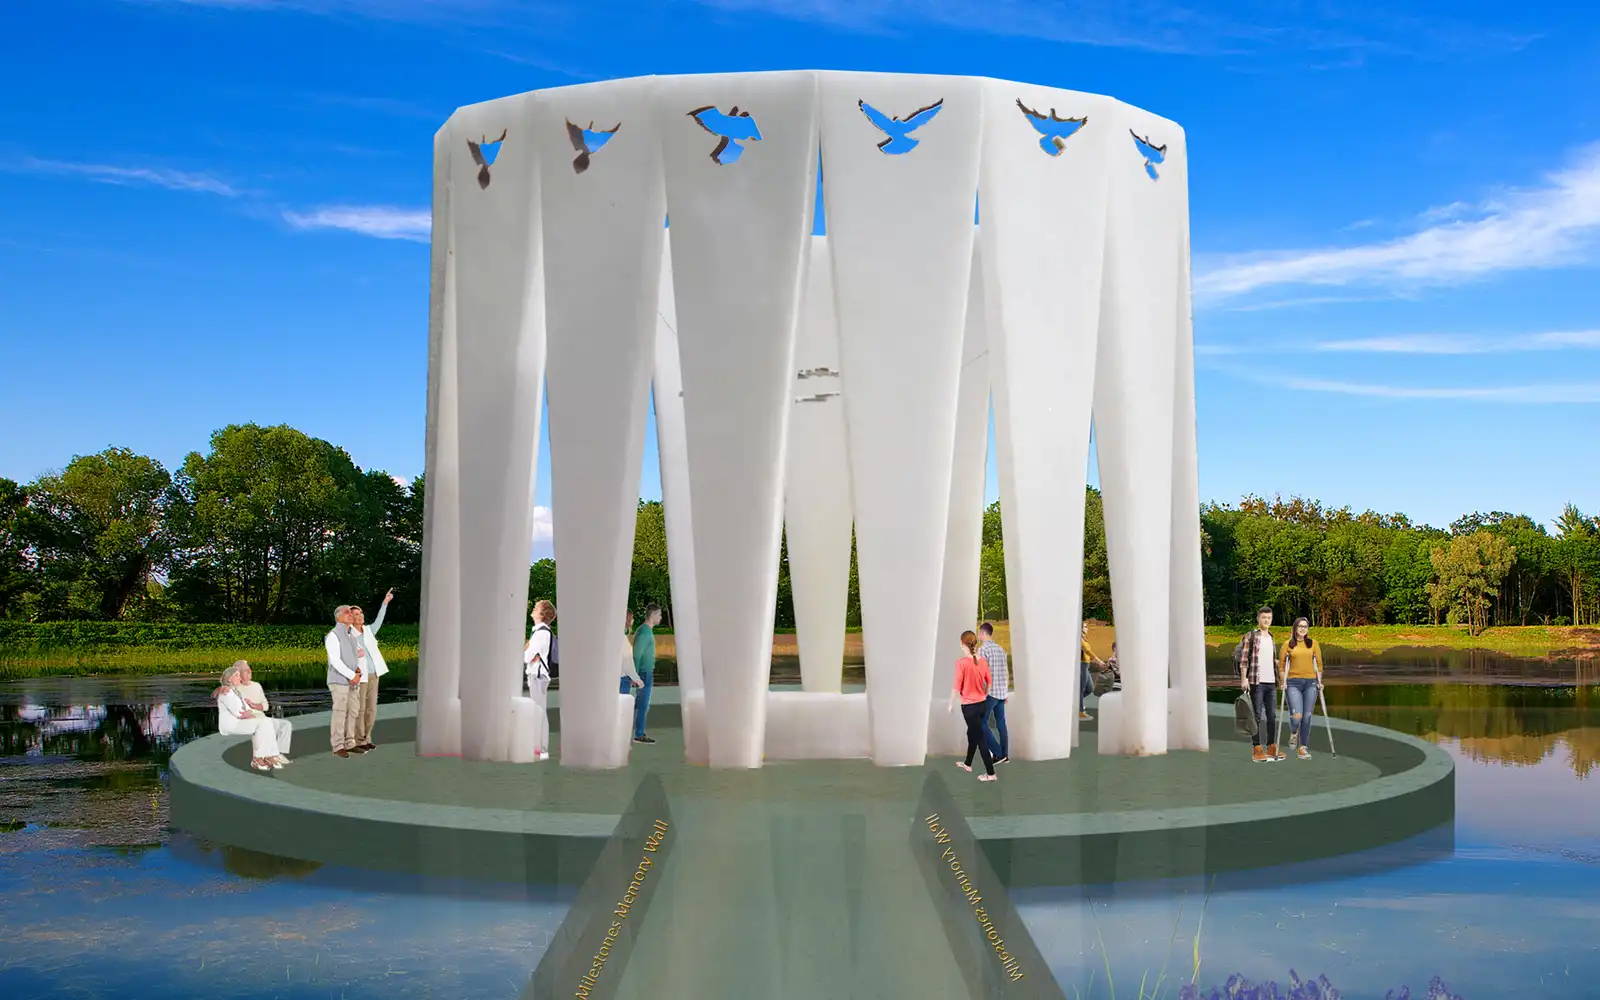 6 Finalists Chosen to Design Memorial for Parkland Shooting Victims